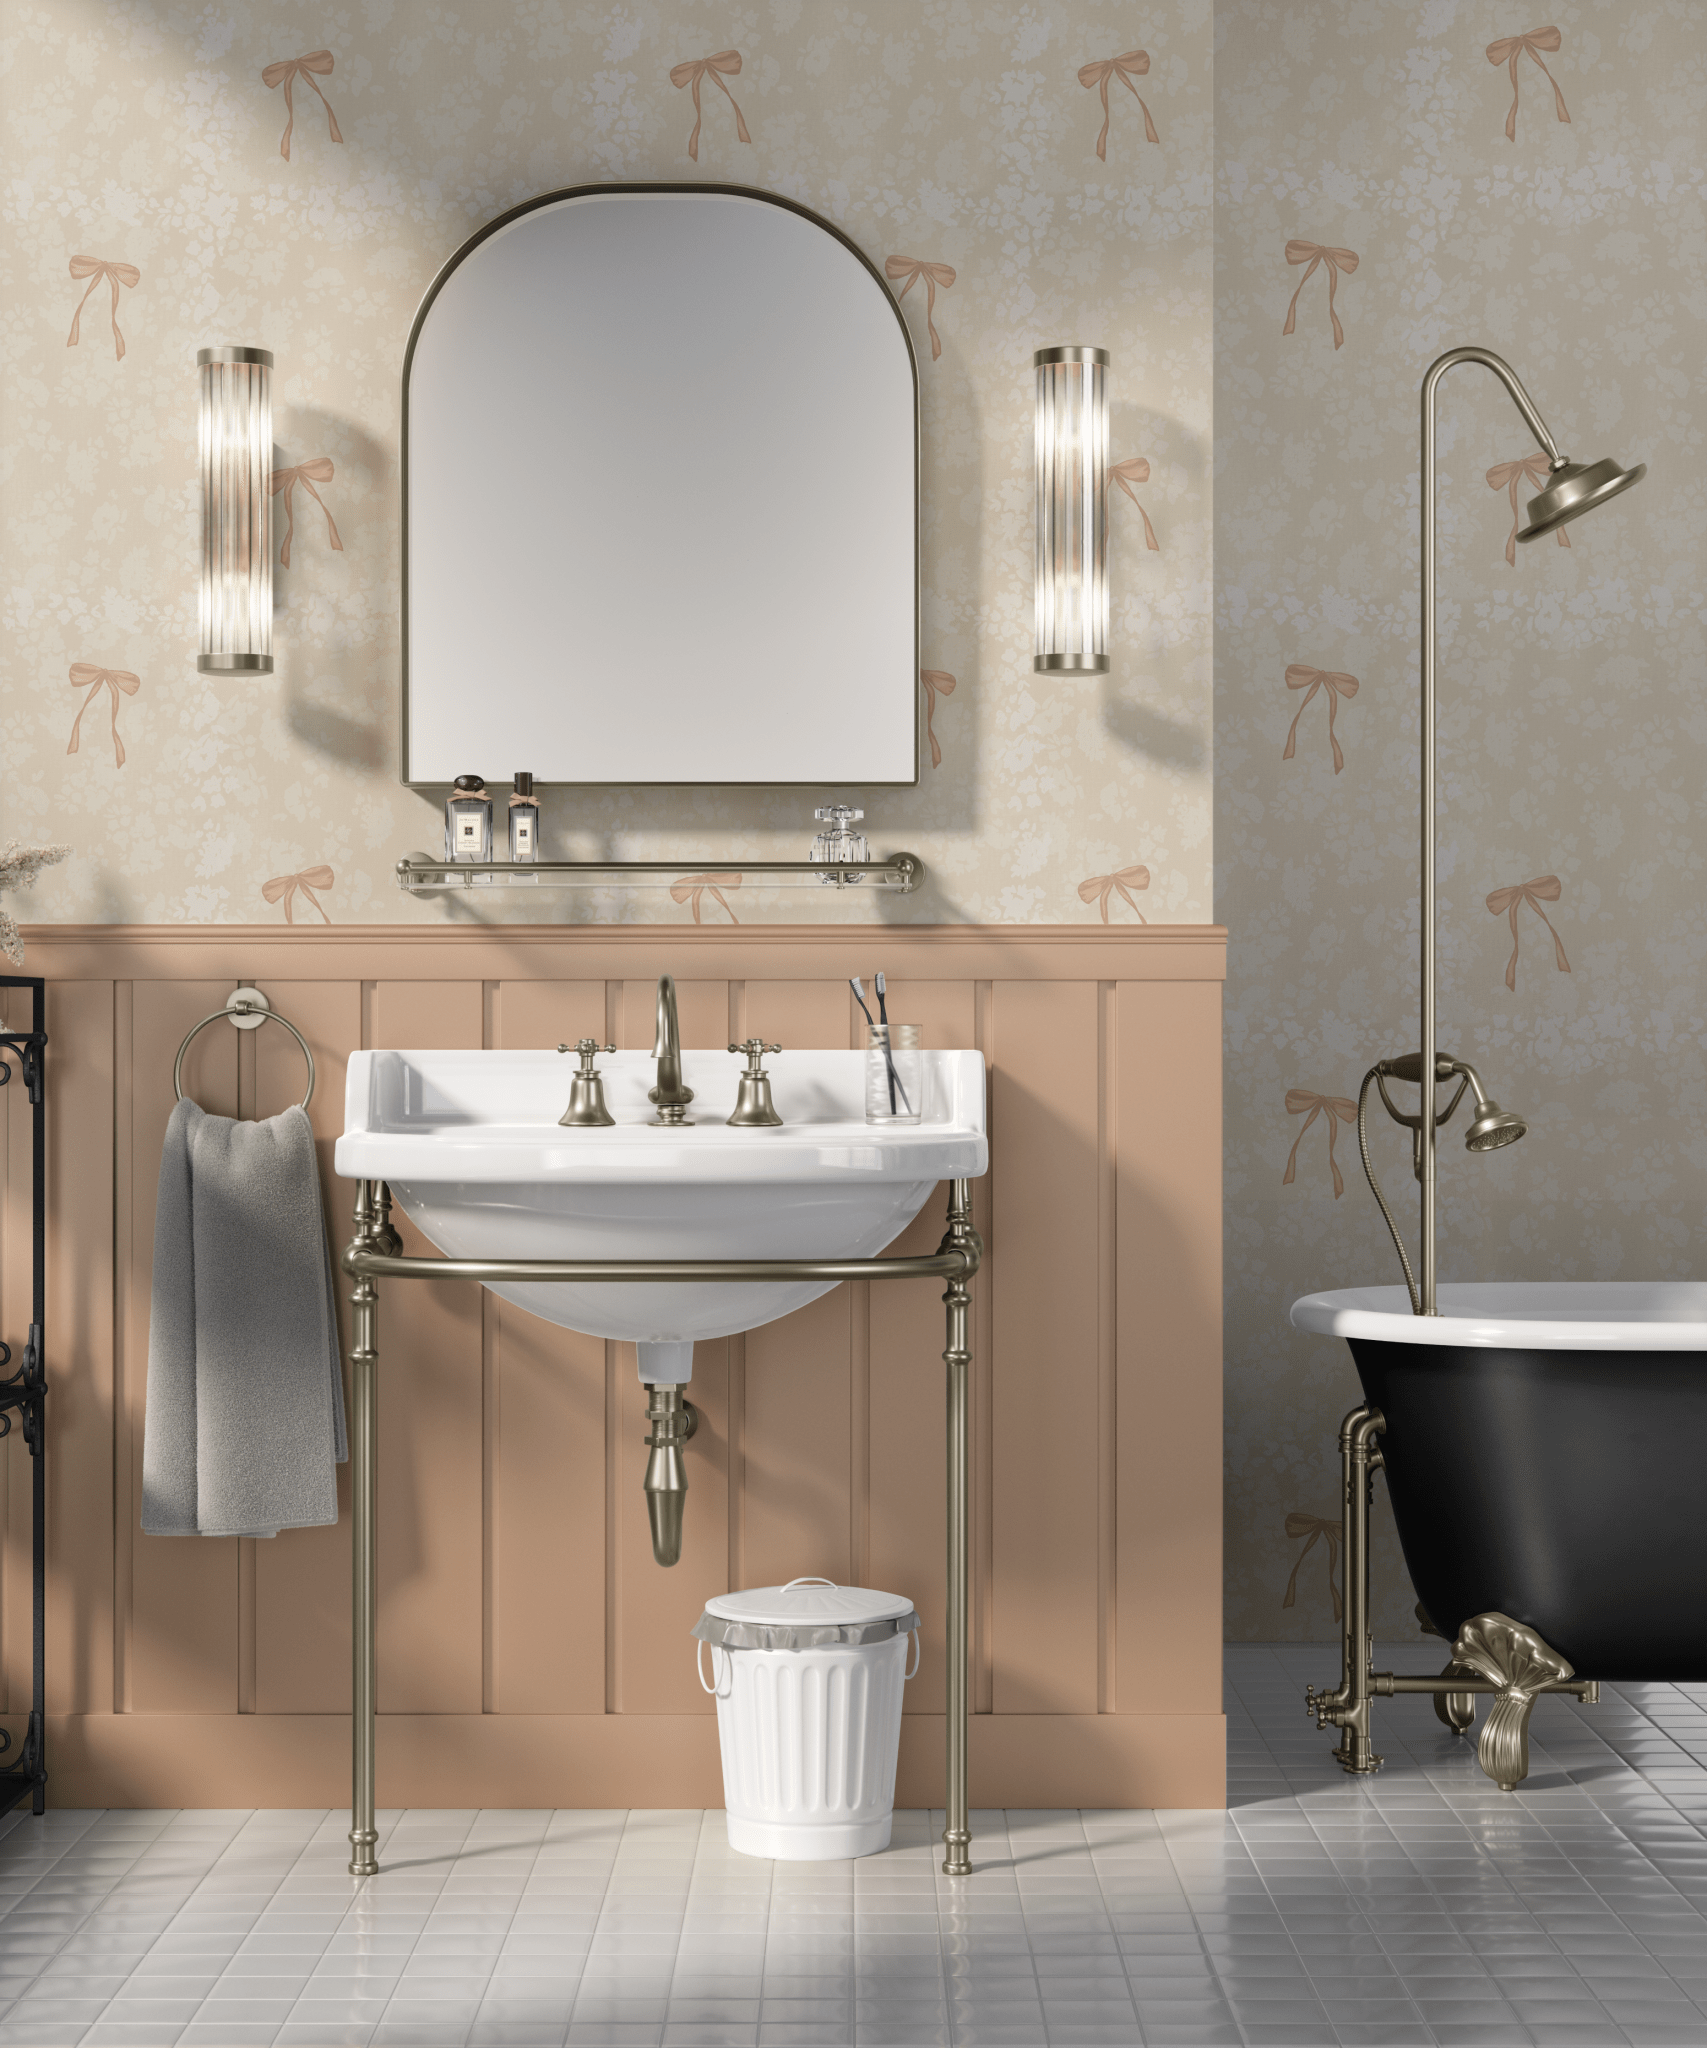 Bathroom featuring a wall-mounted sink with brass supports, a large arched mirror flanked by vertical light sconces, and a classic black clawfoot bathtub, set against a wall adorned with cream wallpaper featuring a subtle floral pattern and bows